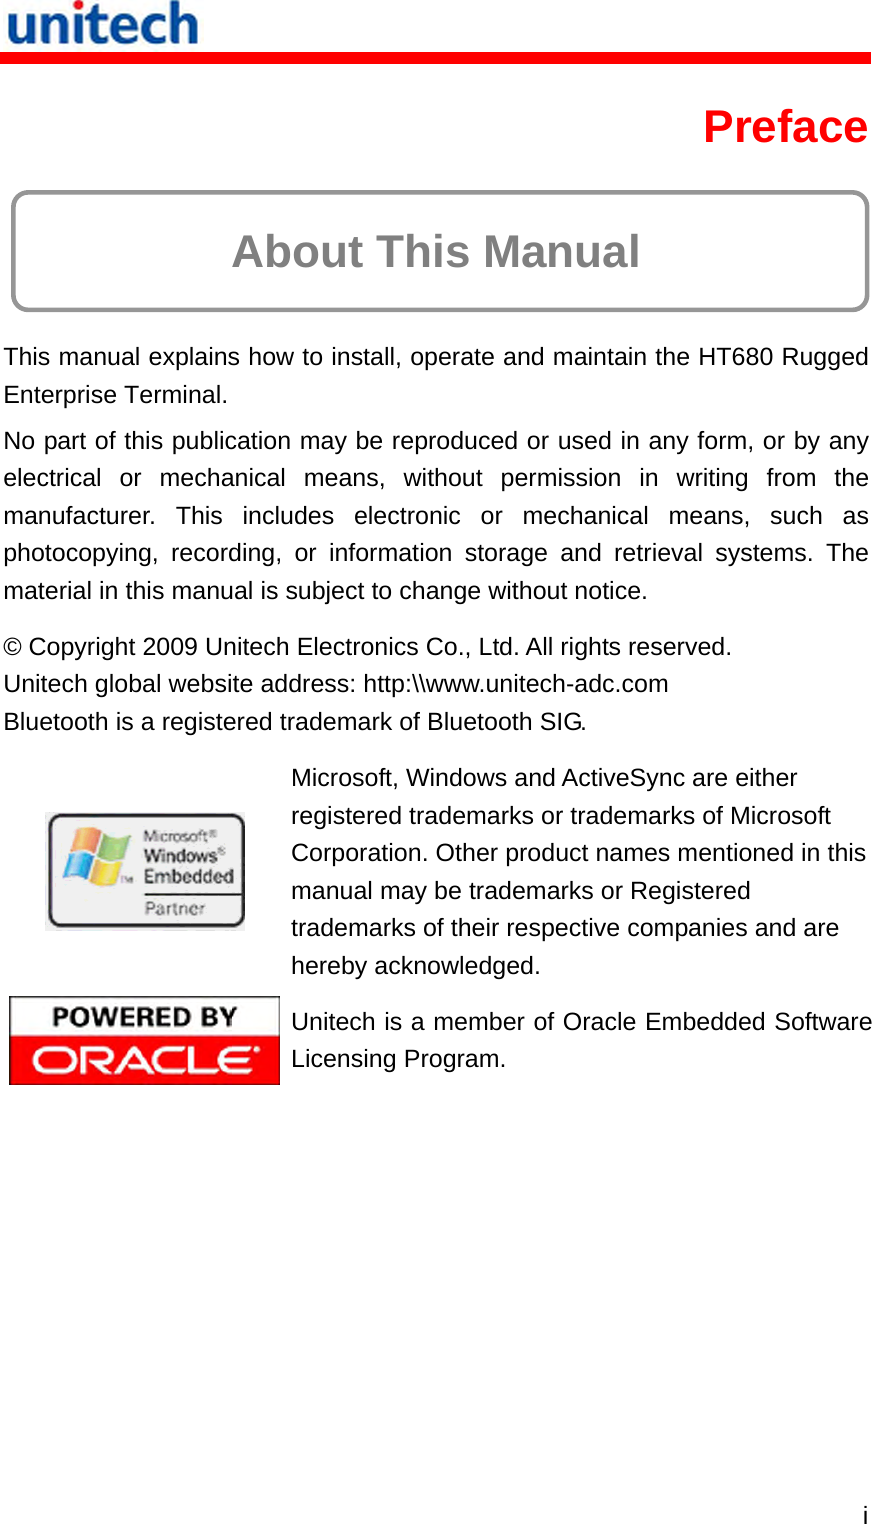   i Preface  About This Manual This manual explains how to install, operate and maintain the HT680 Rugged Enterprise Terminal. No part of this publication may be reproduced or used in any form, or by any electrical or mechanical means, without permission in writing from the manufacturer. This includes electronic or mechanical means, such as photocopying, recording, or information storage and retrieval systems. The material in this manual is subject to change without notice. © Copyright 2009 Unitech Electronics Co., Ltd. All rights reserved. Unitech global website address: http:\\www.unitech-adc.com Bluetooth is a registered trademark of Bluetooth SIG.  Microsoft, Windows and ActiveSync are either registered trademarks or trademarks of Microsoft Corporation. Other product names mentioned in this manual may be trademarks or Registered trademarks of their respective companies and are hereby acknowledged.  Unitech is a member of Oracle Embedded Software Licensing Program. 